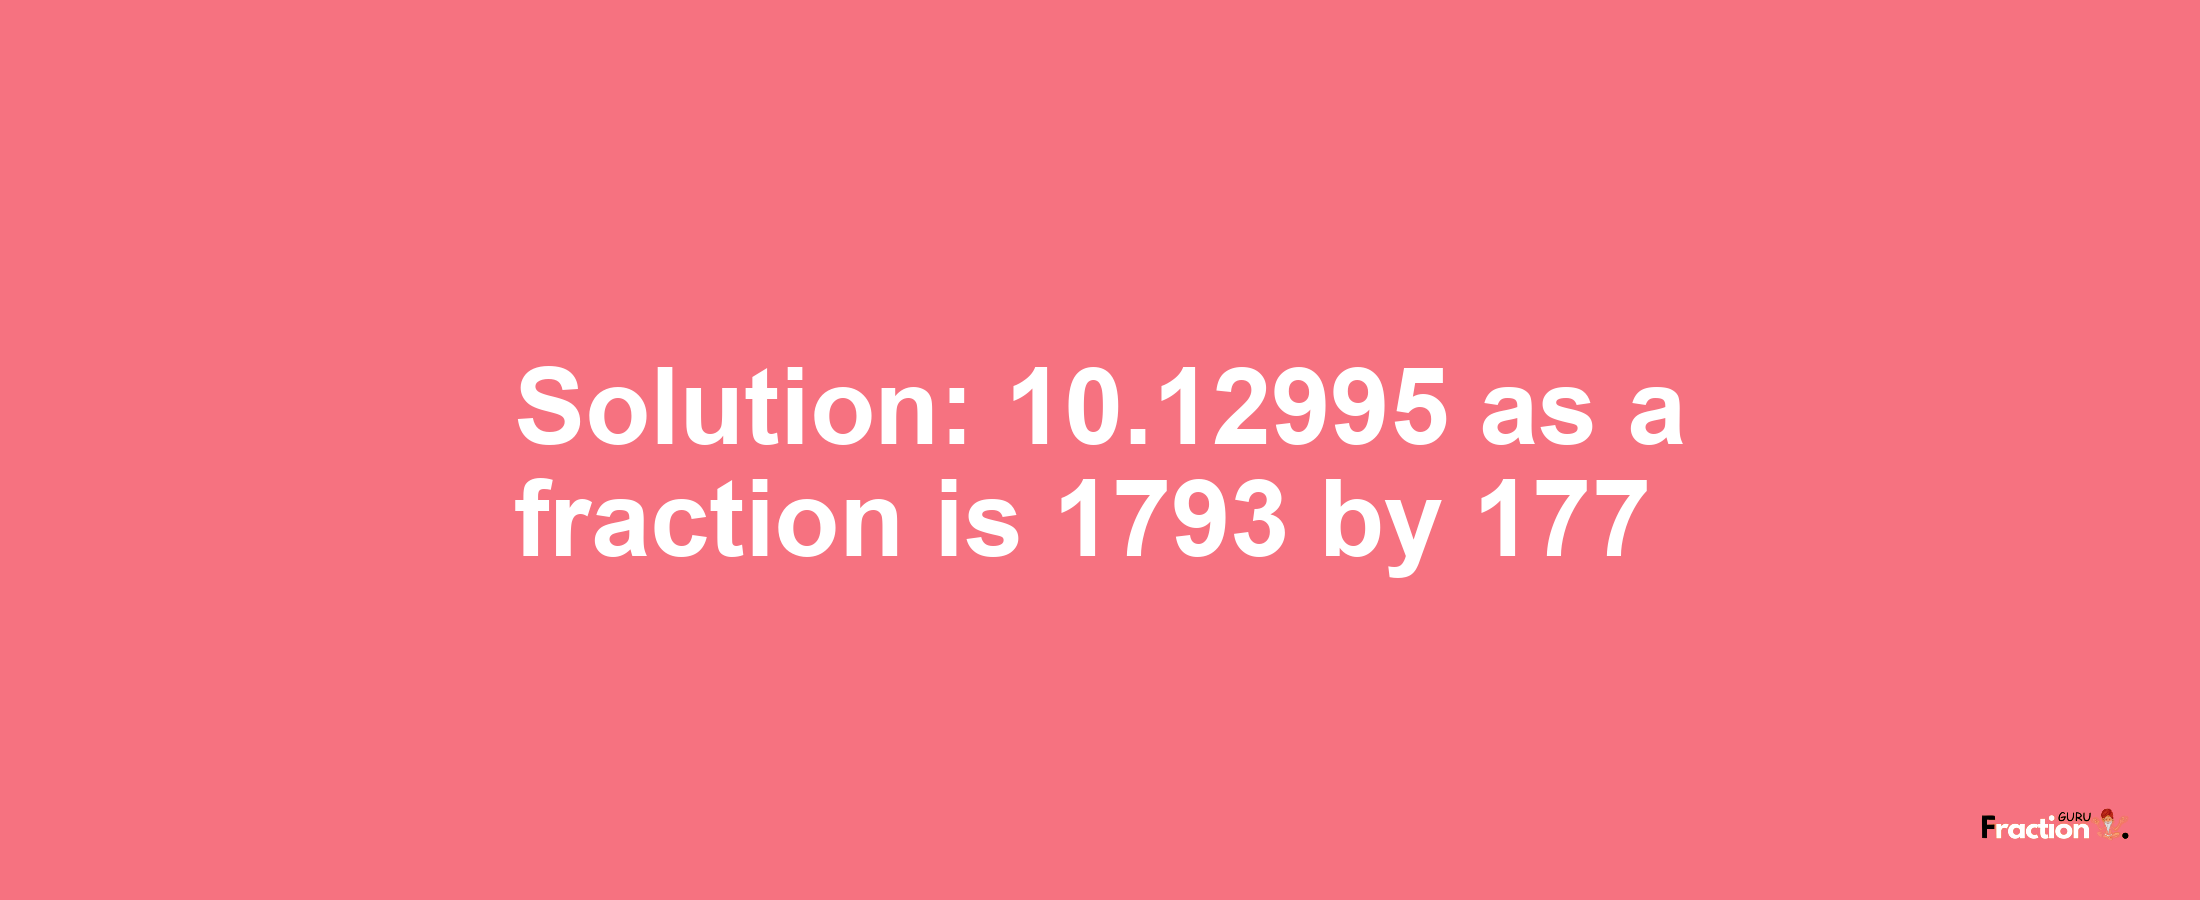 Solution:10.12995 as a fraction is 1793/177